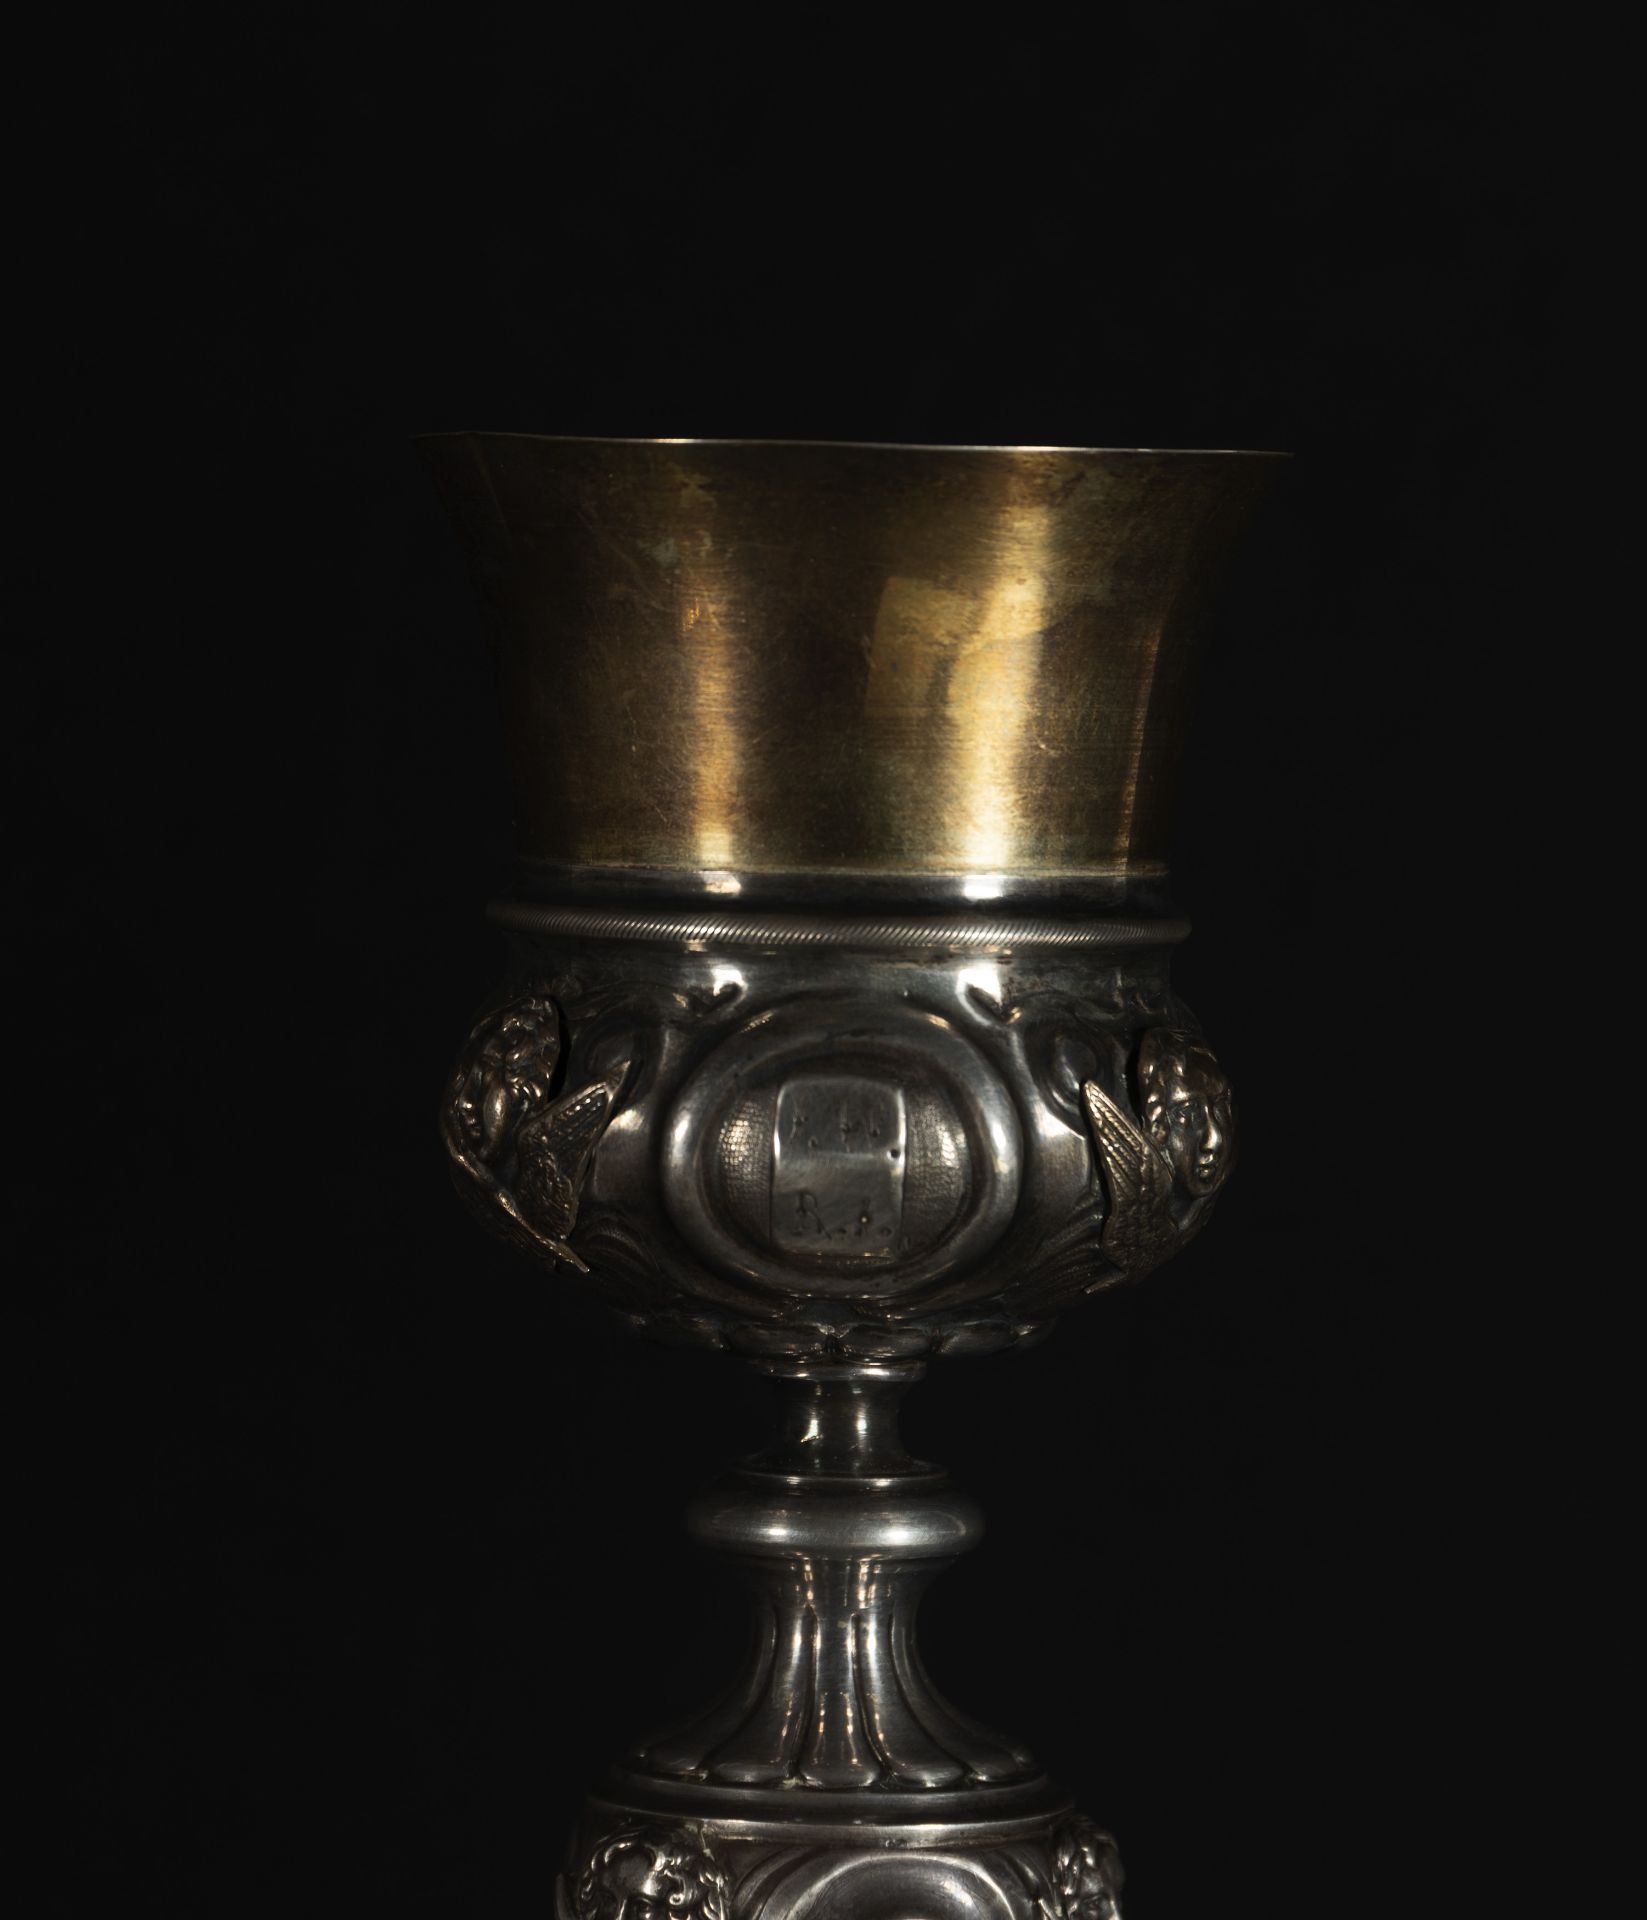 Goblet in 925 Sterling silver and Vermeil, hallmarks from Barcelona and Platero Casas marks, 19th ce - Image 3 of 6